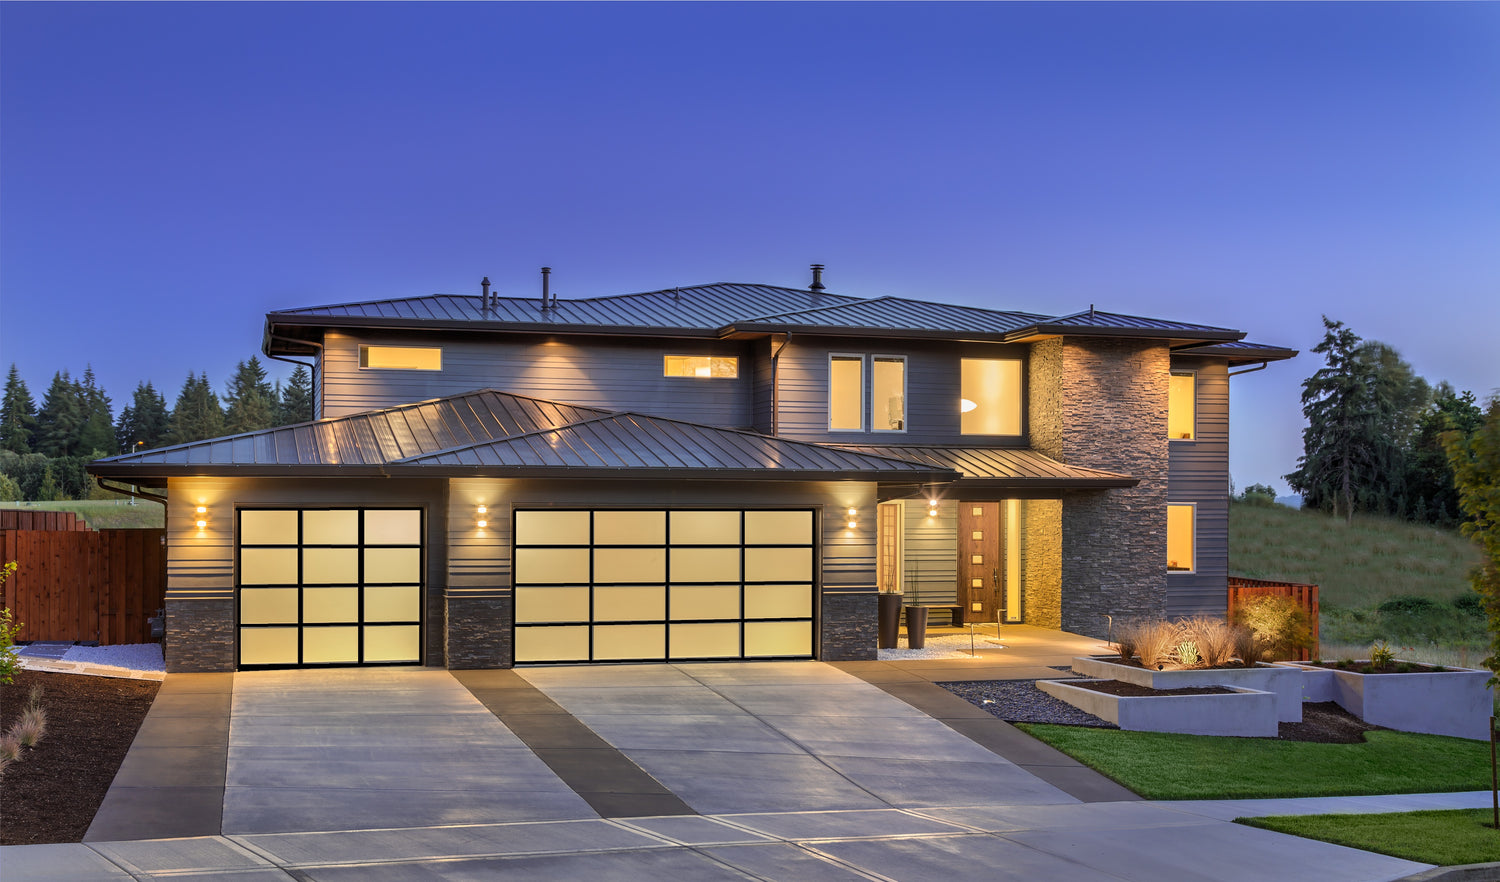 Modern home with frosted glass garage doors illuminated at dusk, showcasing a sleek and stylish exterior